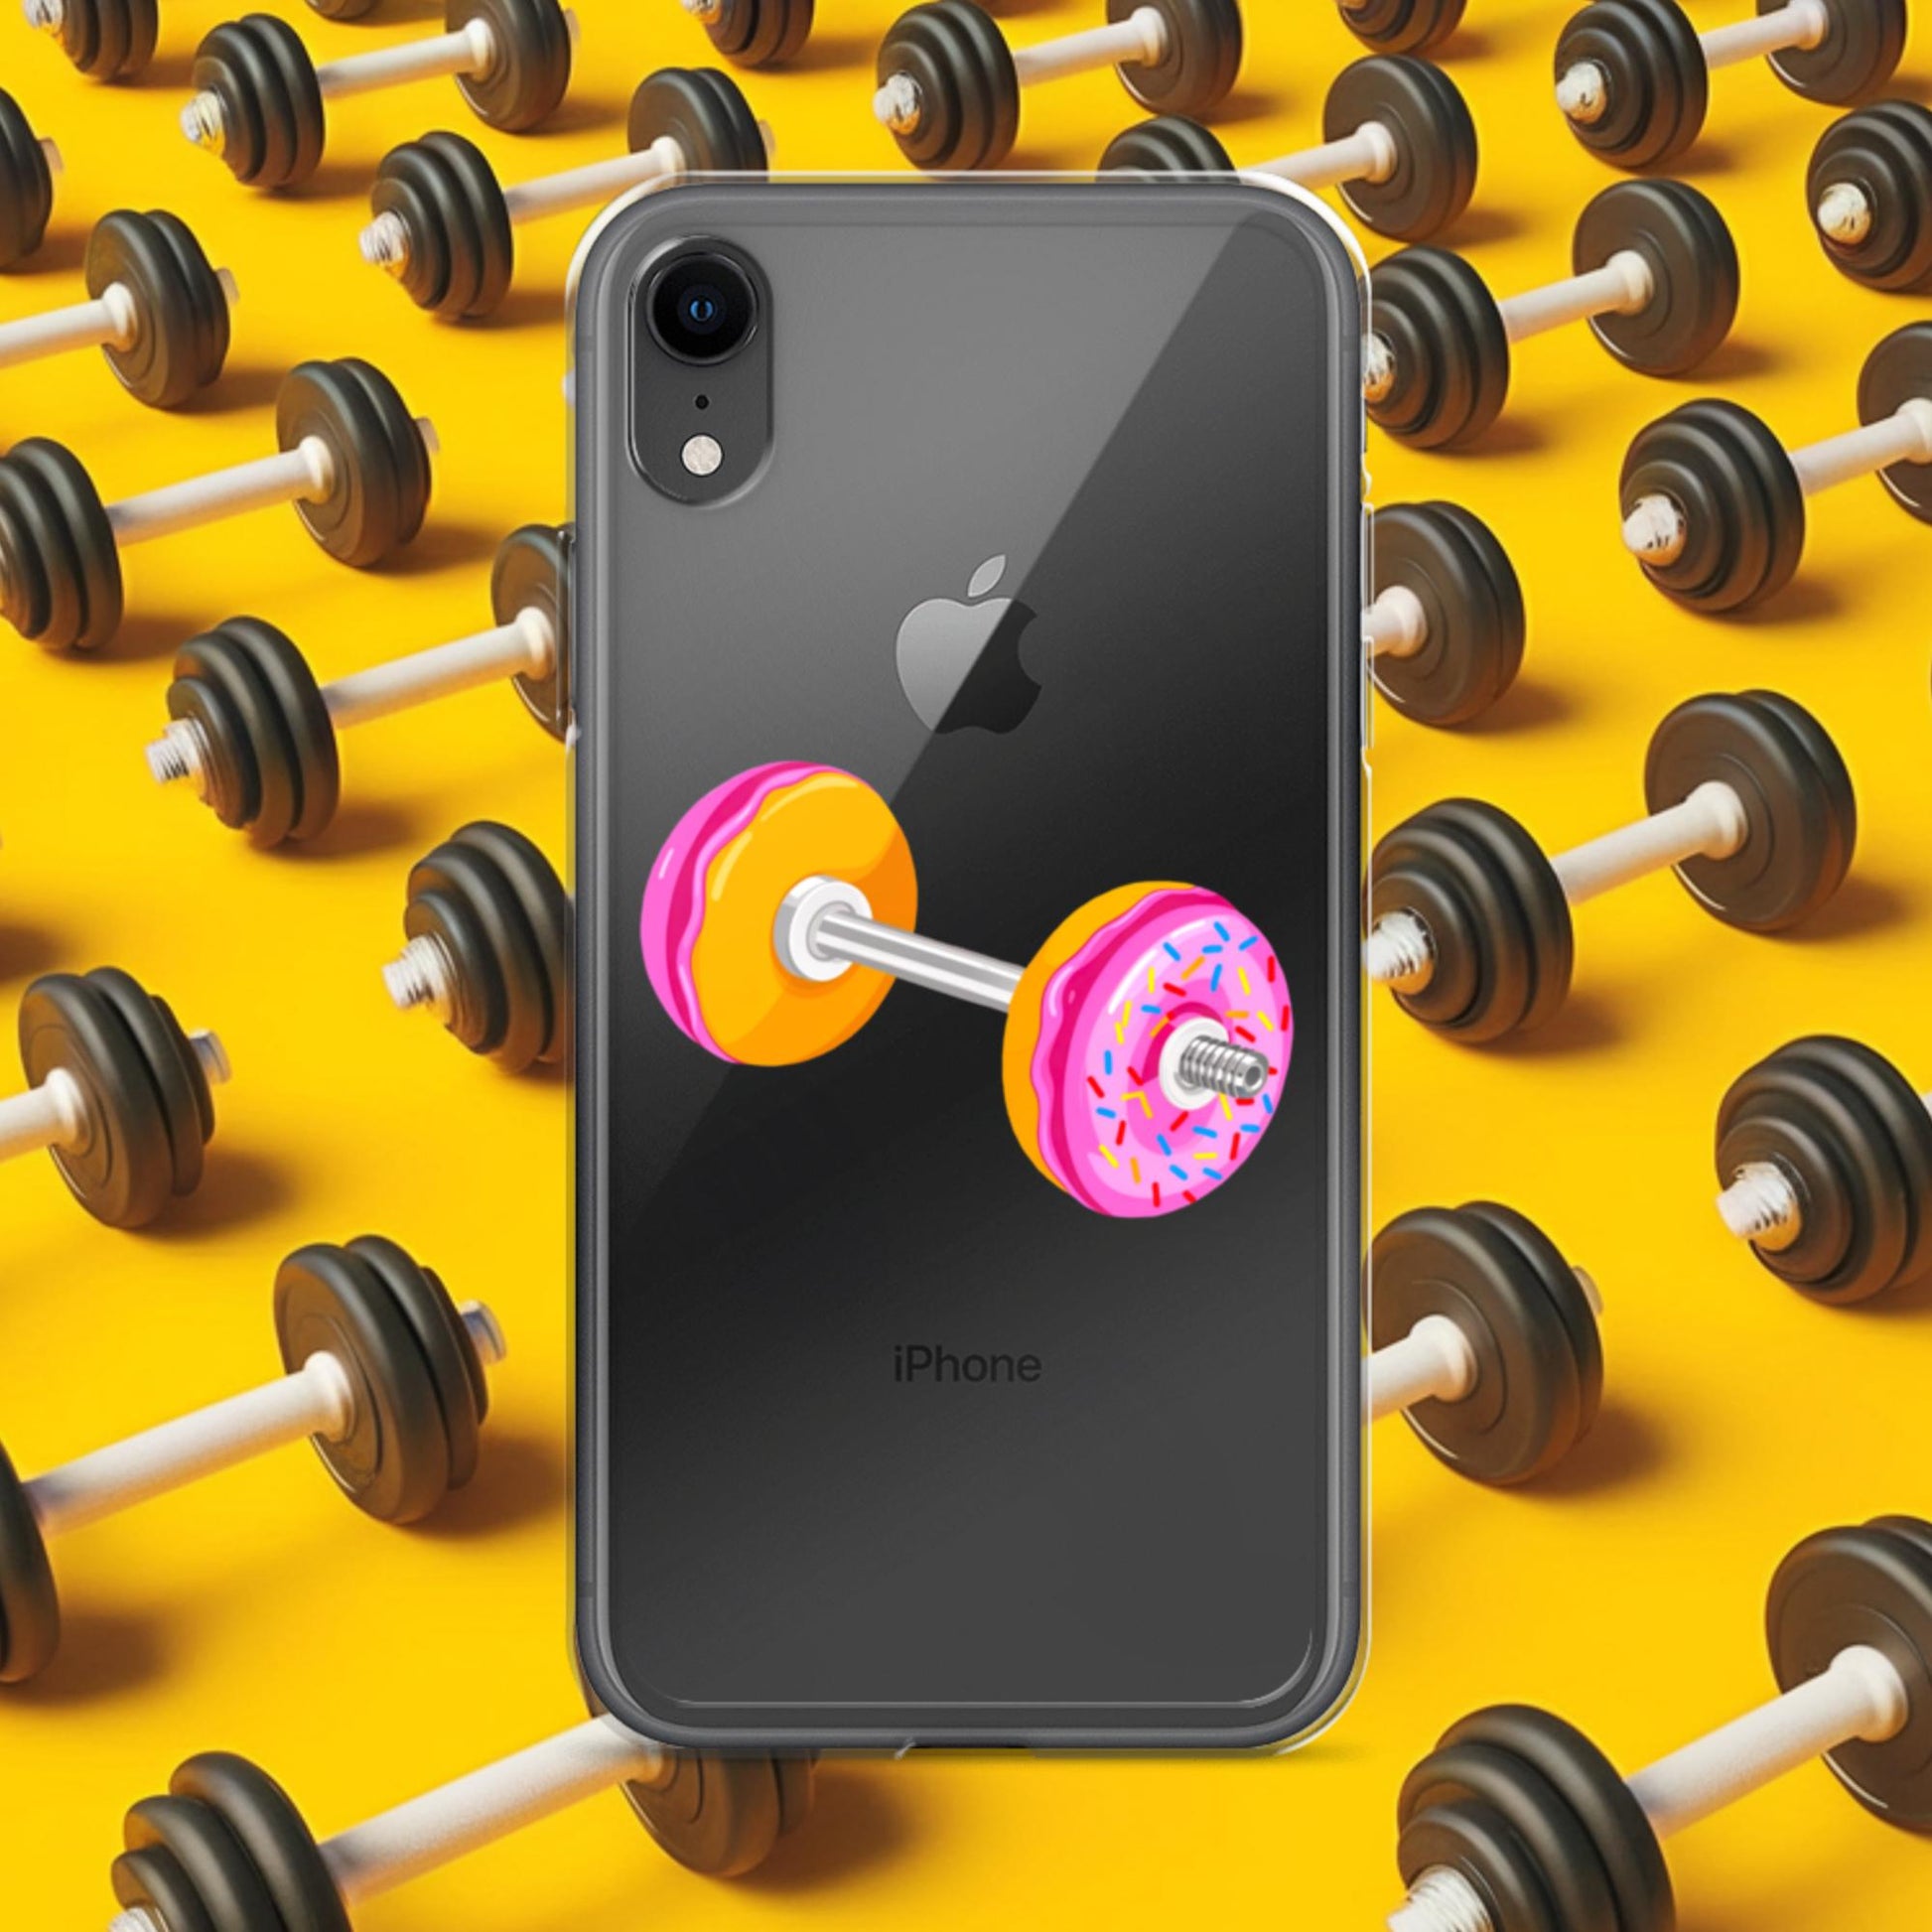 Donut Dumbbell Donuts Barbell Funny Bulk Diet Gym Workout Fitness Bodybuilding Clear Case for iPhone Next Cult Brand